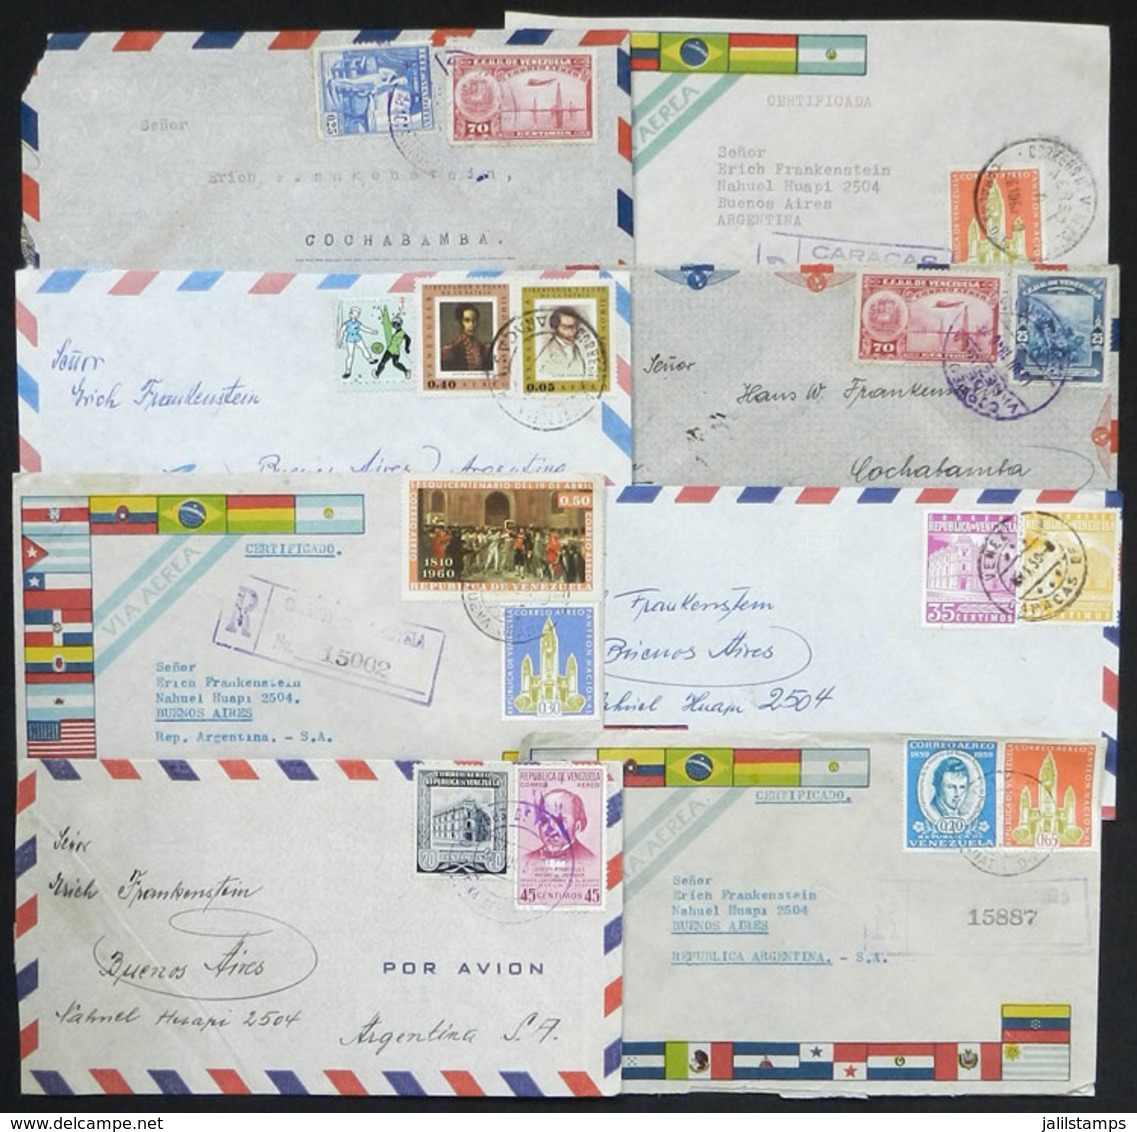 VENEZUELA: 19 Covers With Interesting Postages Sent To Argentina, Very Fine Quality, LOW START. - Venezuela